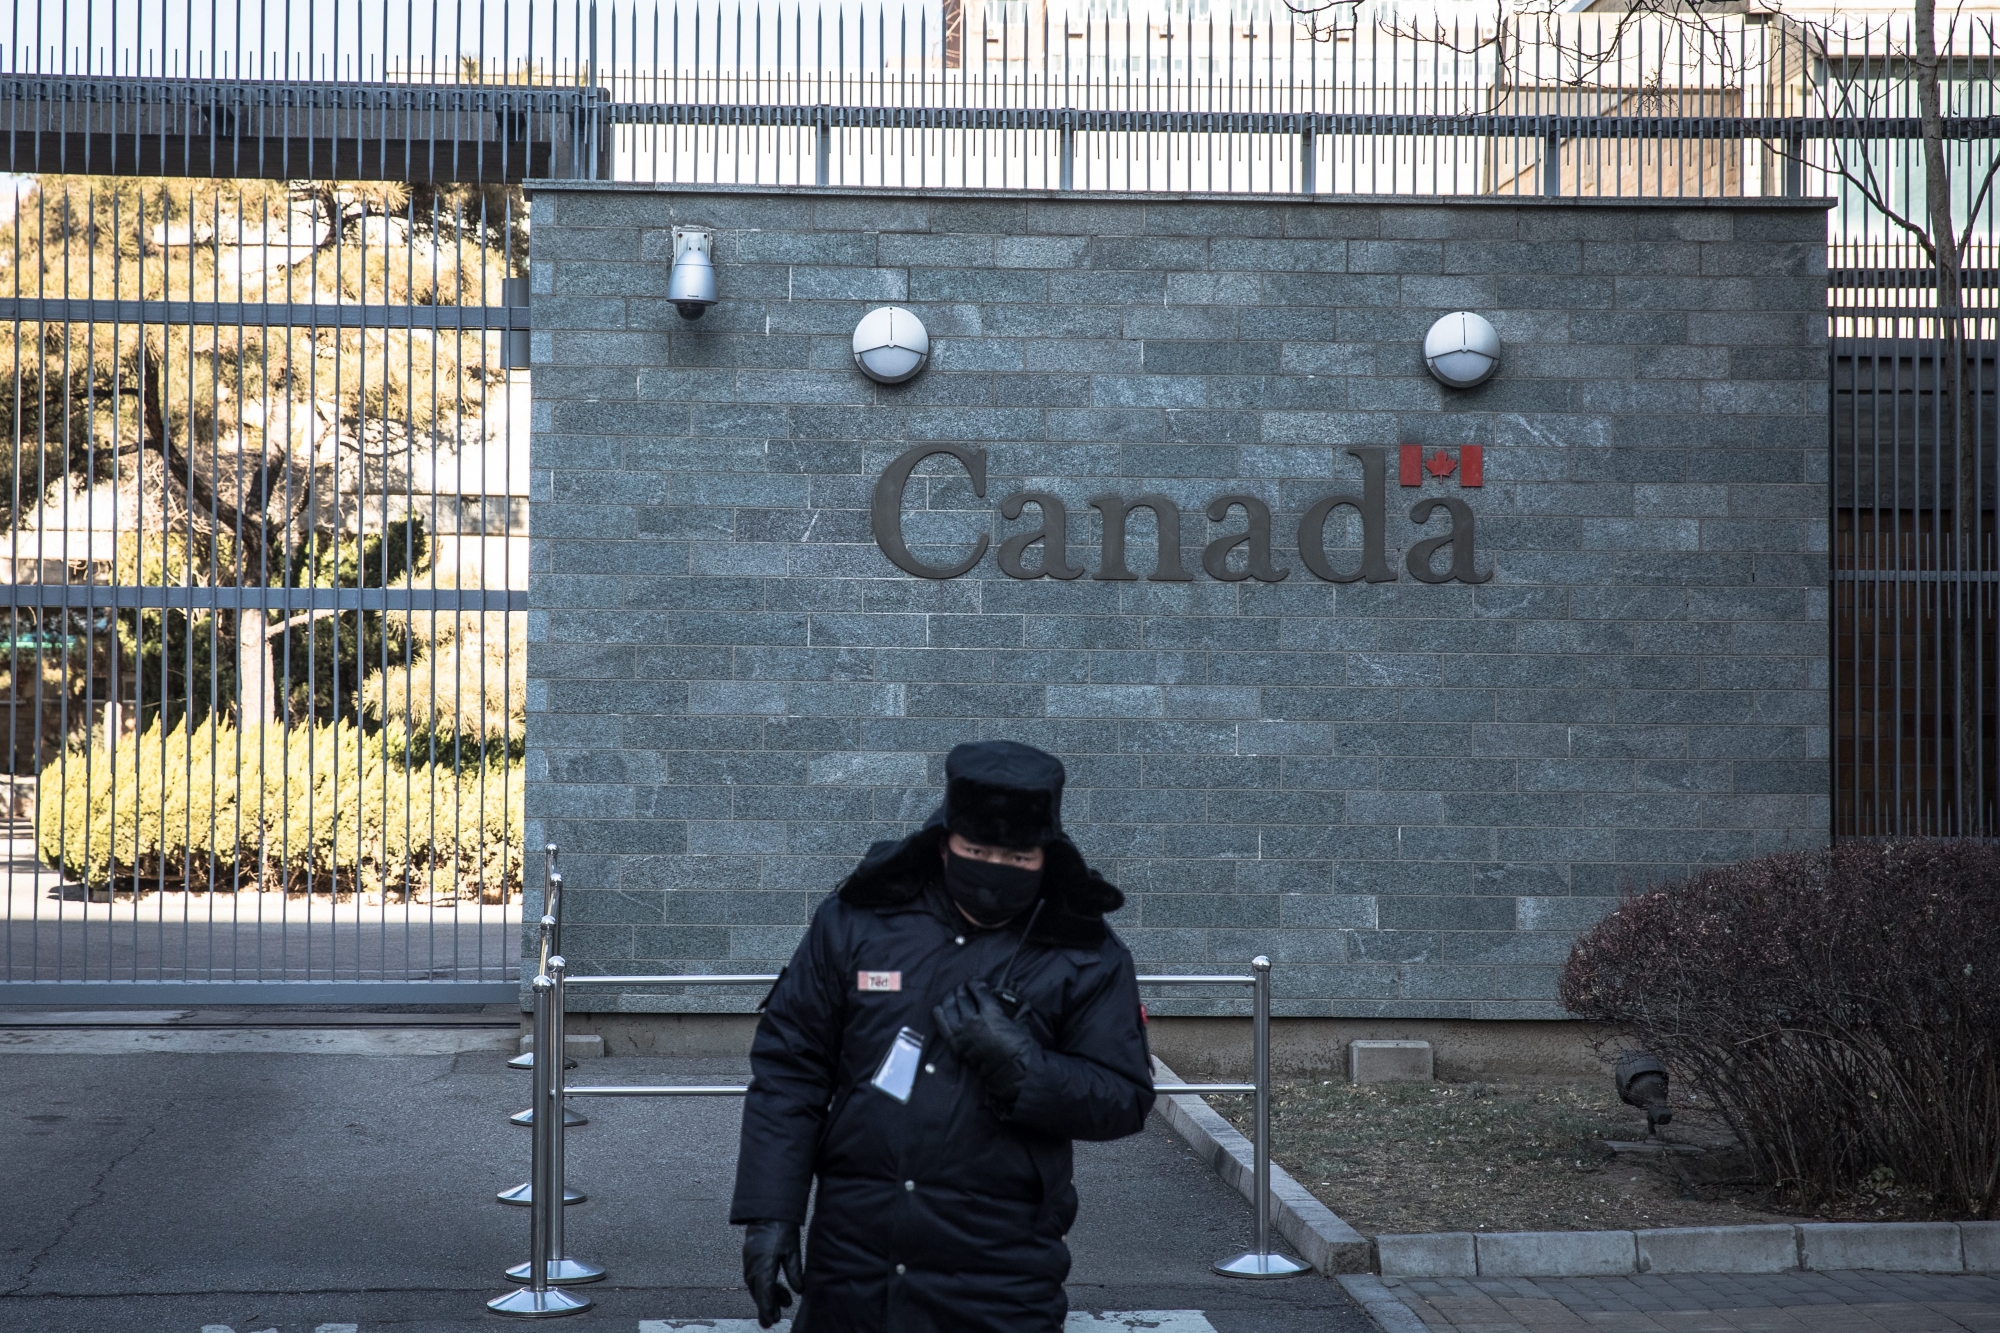 epa07285154 A Chinese security official stands guard in front of the Canadian embassy in Beijing, China, 15 January 2019. A Chinese court issued a death sentence to Robert Lloyd Schellenberg of Canada for drug smuggling. On 14 January 2019, following an appeal, a high court in Dalian city changed the man's previous 15 years in prison sentence for drug smuggling and sentenced him to death, saying his previous sentence was too lenient, according to media reports. The ruling comes during a diplomatic row between Canada and China after Canadian authorities arrested Meng Wanzhou, an executive for Chinese telecommunications firm Huawei, at the request of the USA.  EPA/ROMAN PILIPEY CHINA CANADA COURT